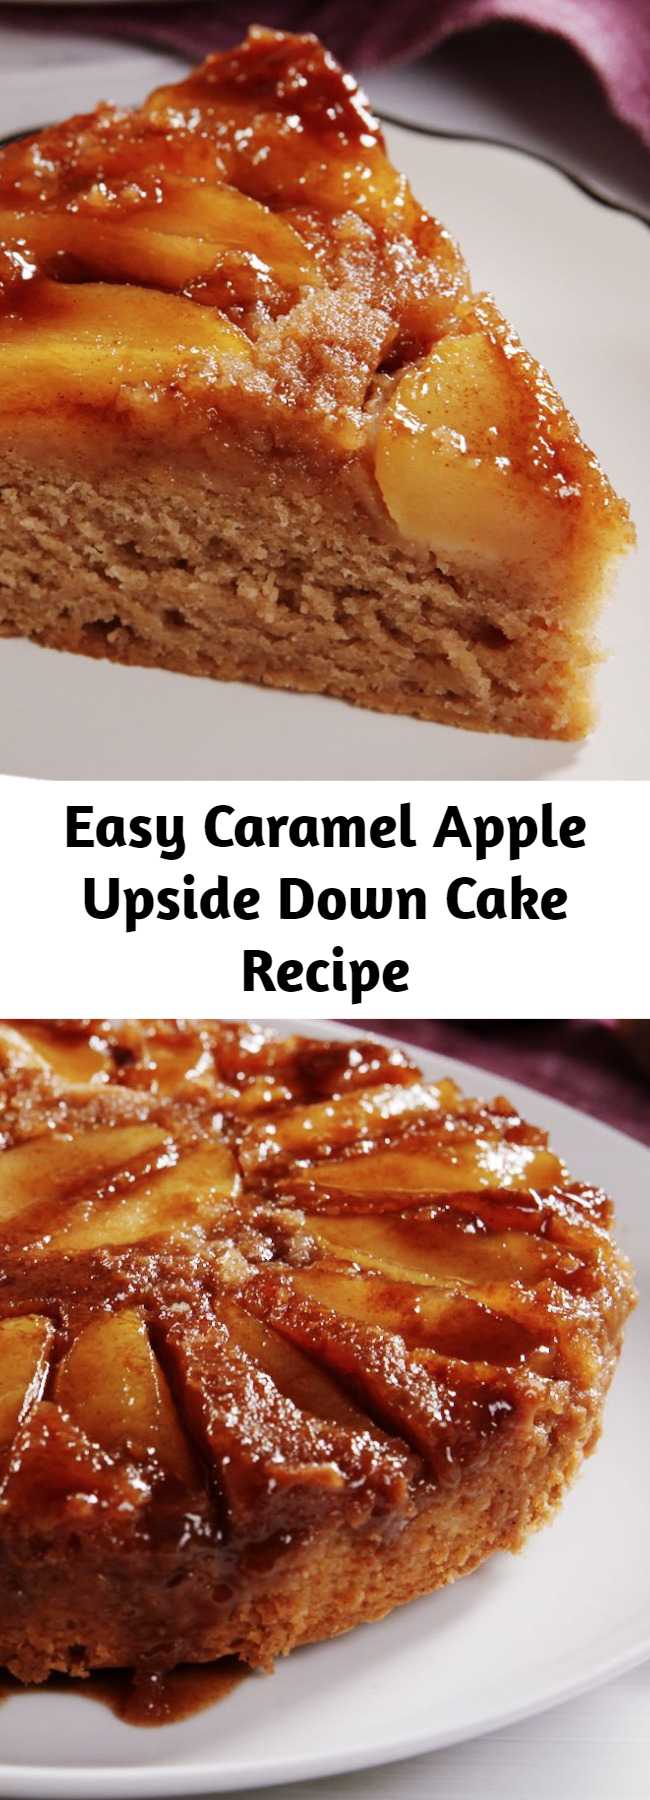 Easy Caramel Apple Upside Down Cake Recipe - Move over, pineapple! This is our new favorite upside-down cake. This tastes like a spice cake crossed with a caramel apple and we are INTO IT. After tasting this Caramel Apple Upside Down Cake, you won't want any other apple cake.